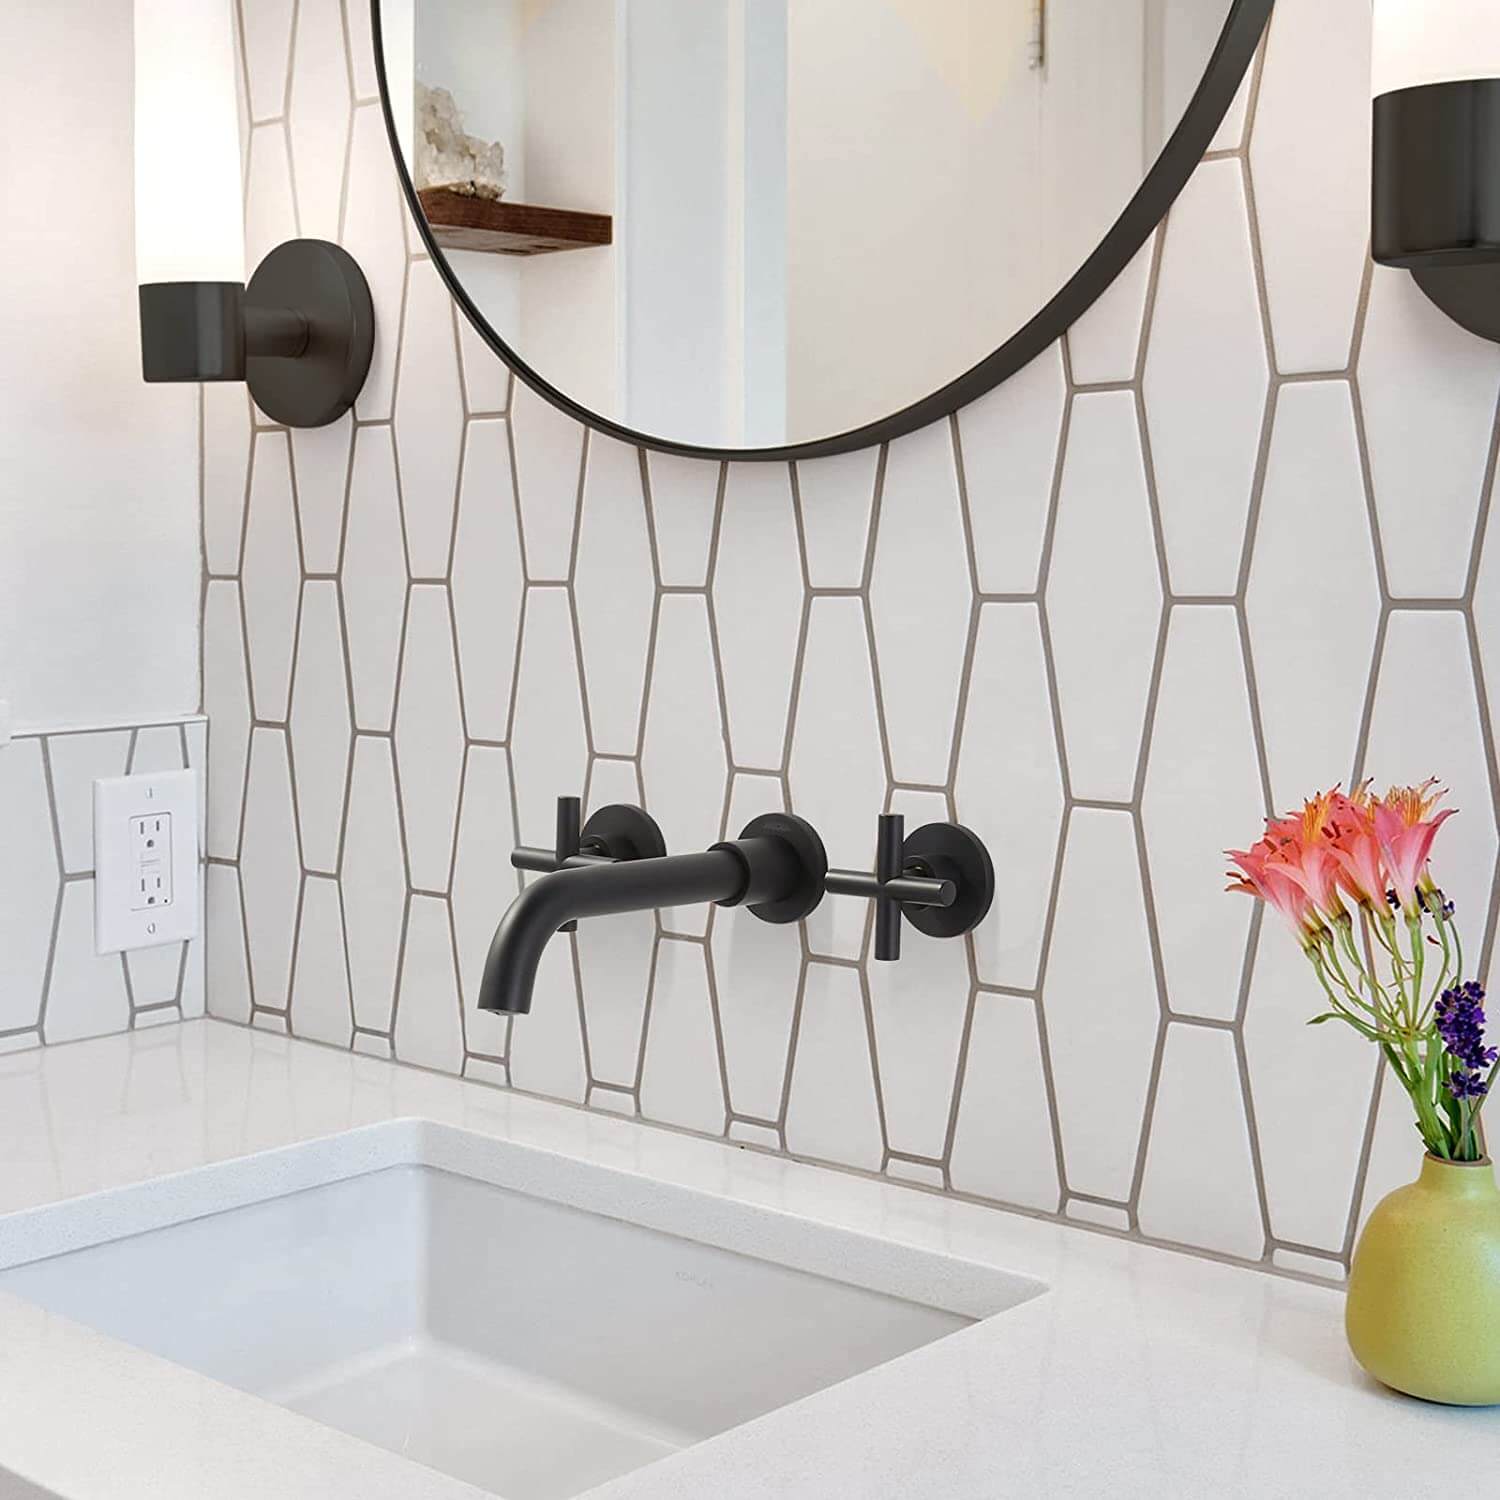 How to Choose Ultra Modern Bathroom Faucets ? - Blog - 1